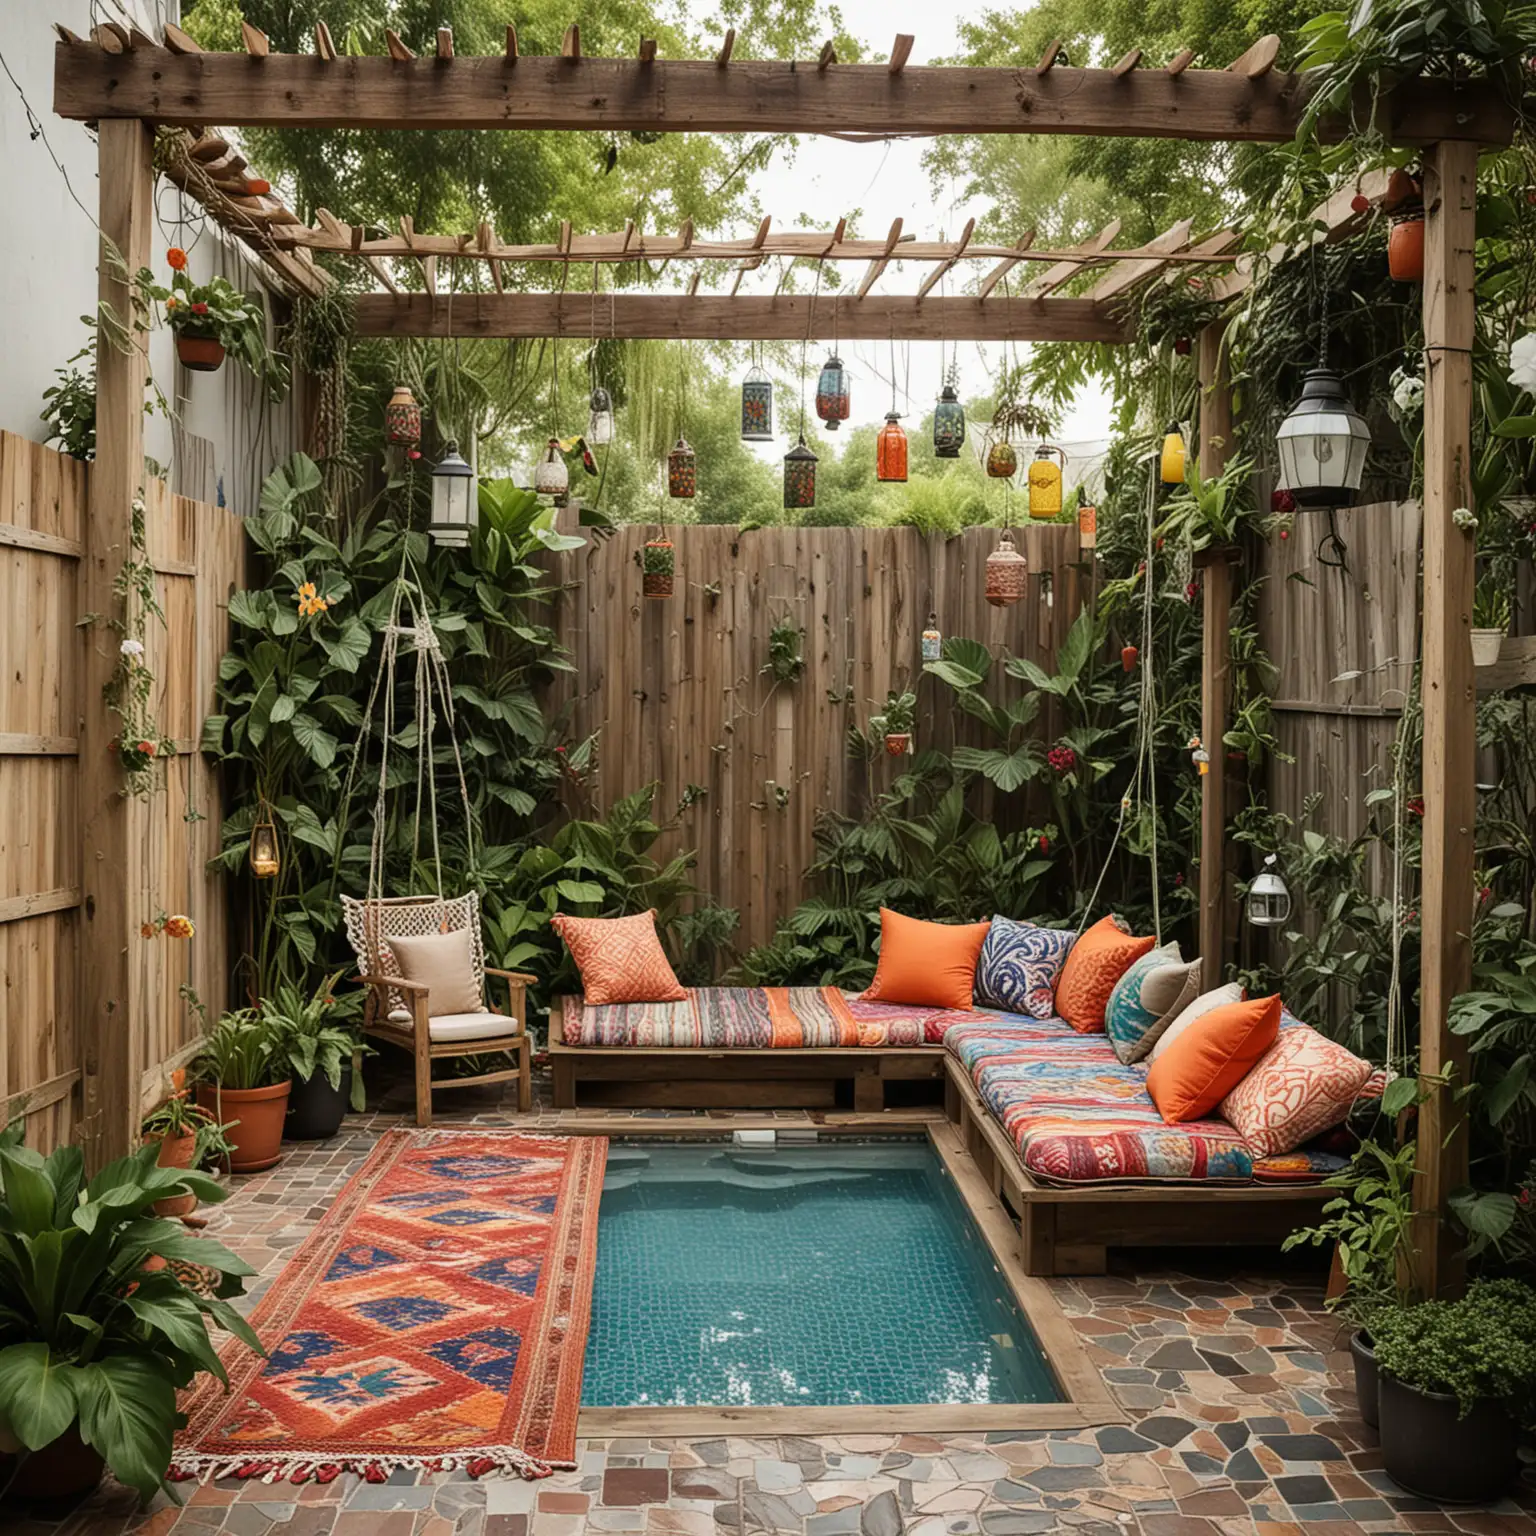 Relaxed-Urban-Backyard-Oasis-with-Colorful-Decor-and-Eclectic-Vibes